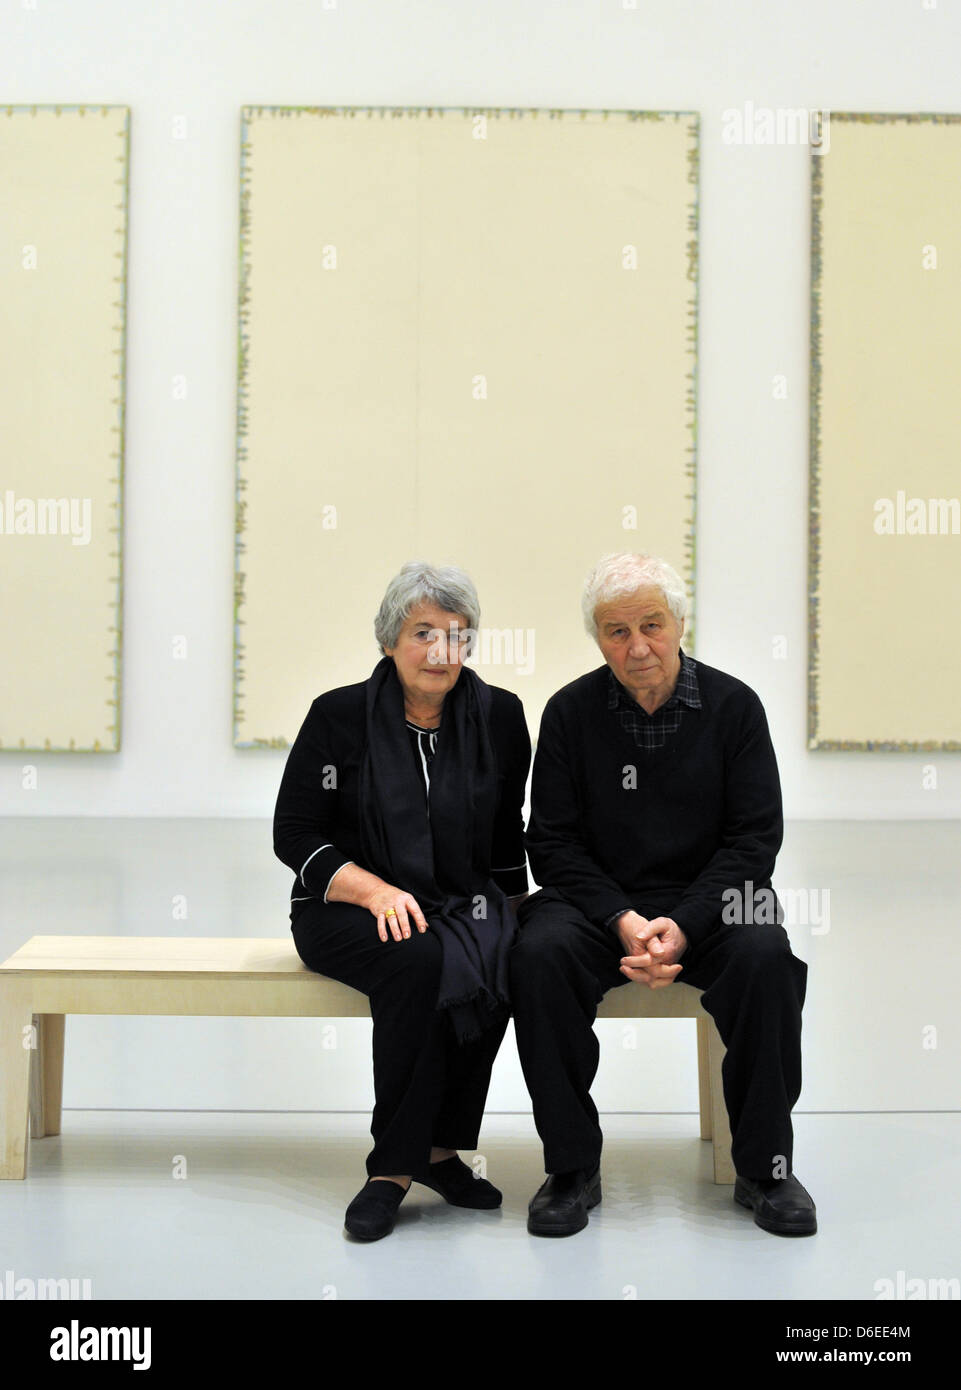 Artist Ilya Kabakov sits with his wife Emilia Kabakov on a bench in front of his works during the opening of the exhibition at the Sprengel Musuem in Hanover, Germany, 27 January 2012. The museum is showing around 60 paintings and three installations for the first time. The exhibition 'A Return to Painting' can be seen from 29 January until 06 May 2012. Photo: BARBARA PREKOPOVA Stock Photo